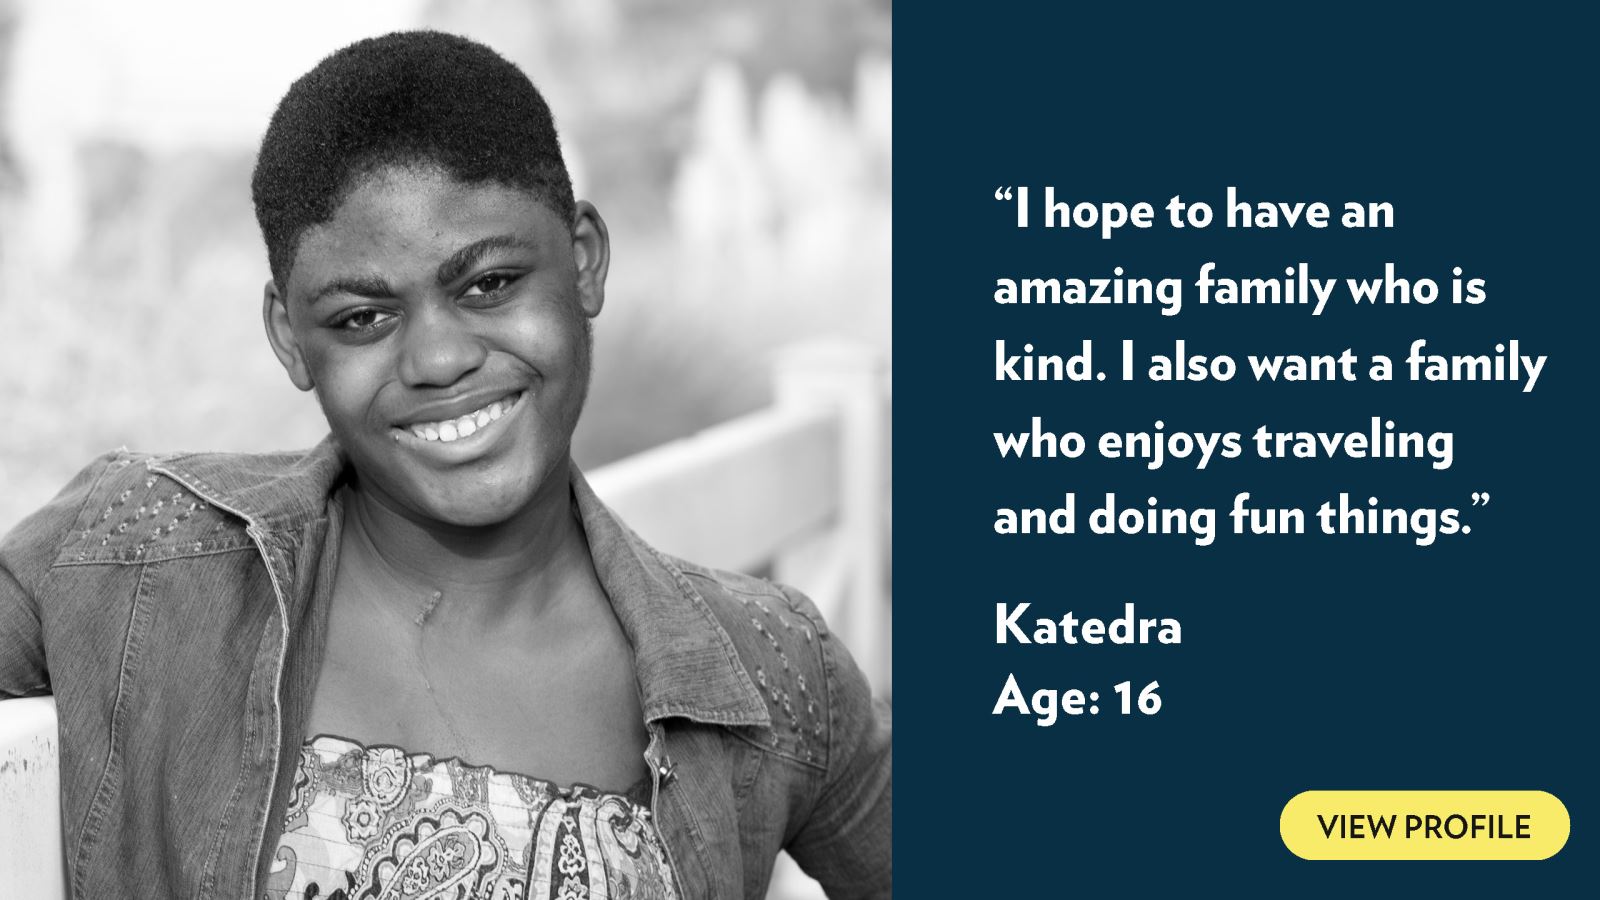 I hope to have an amazing family who is kind. I also want a family who enjoys traveling and doing fun things. Katedra, age 16. View profile.